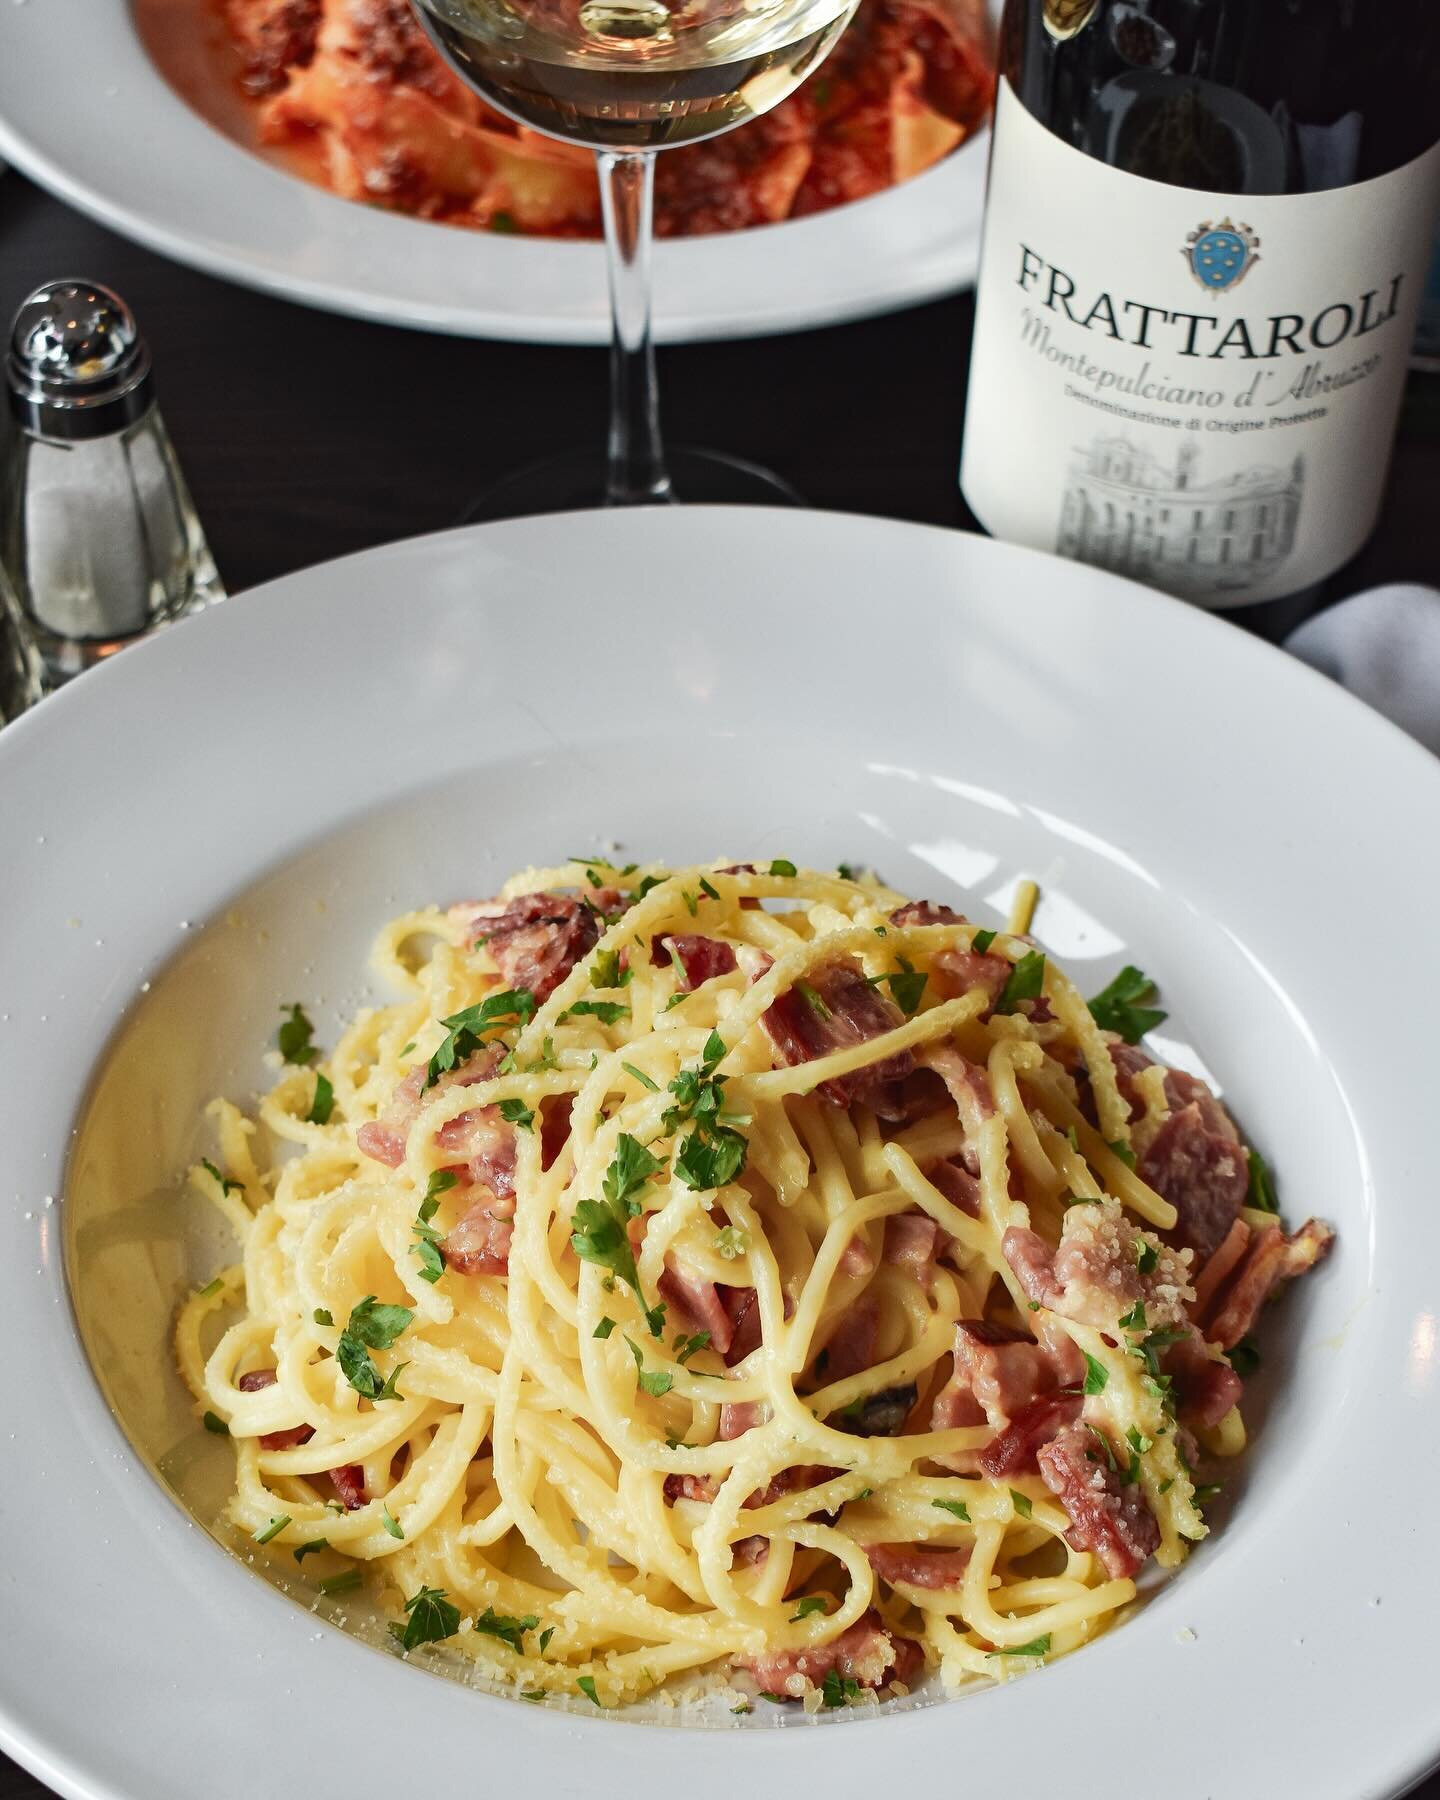 Join us for dinner and try one of our authentic Italian pasta dishes like the Carbonara,&nbsp;Gnocchi Spezzatino, or Pappardelle Bolognese 🍝

#pasta #Italian #homemade #foodstagram #bostonfood #bosfeed